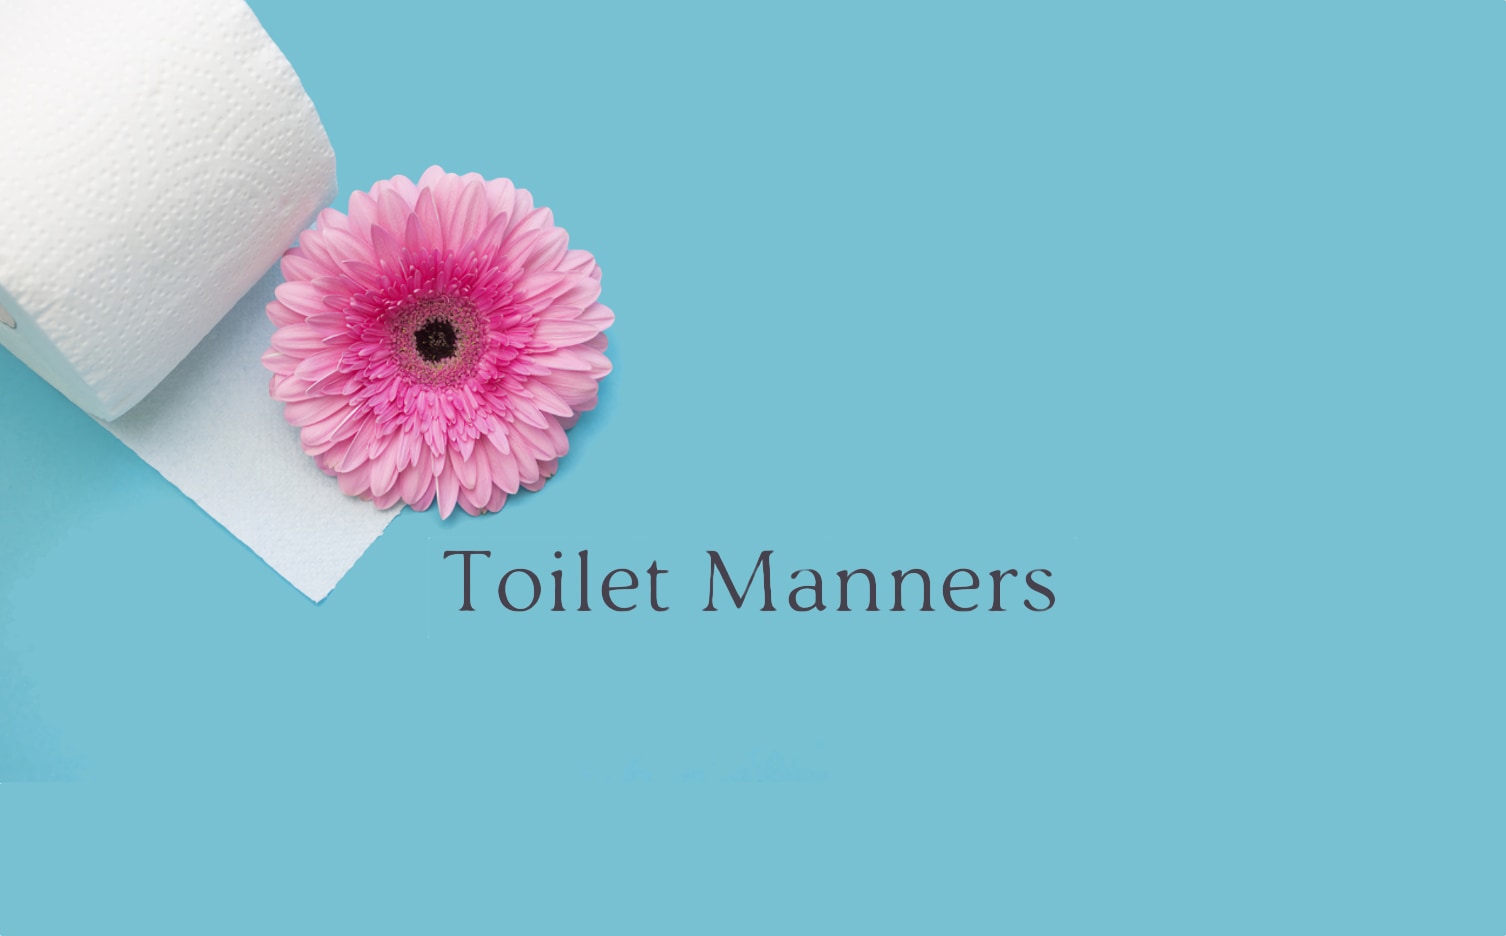 Image showing a toilet paper roll with a flower